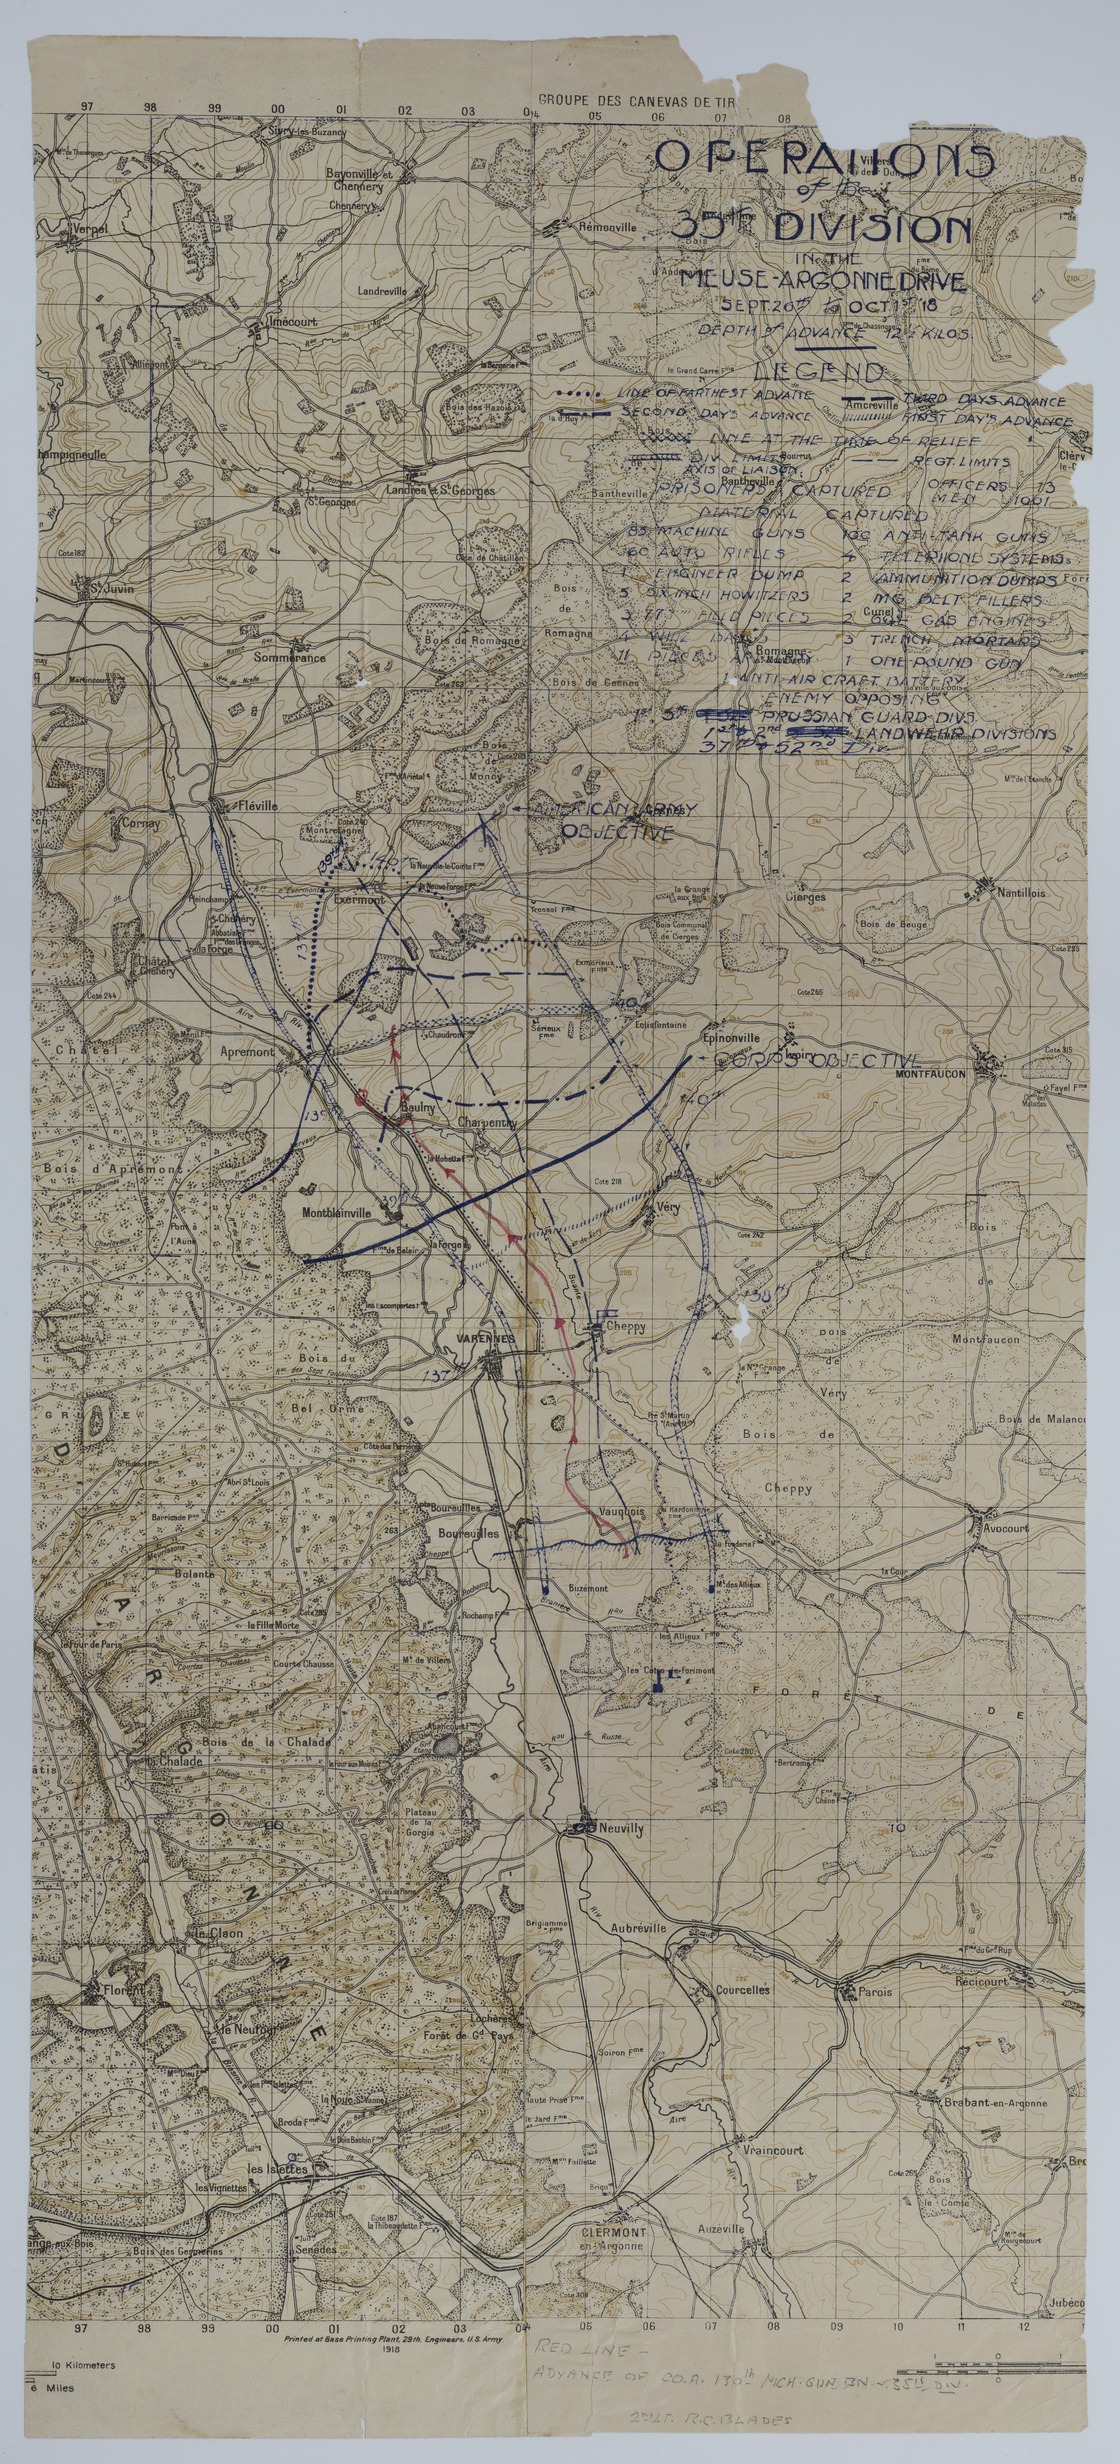 Map of 35th Division Operations During the Meuse-Argonne Offensive